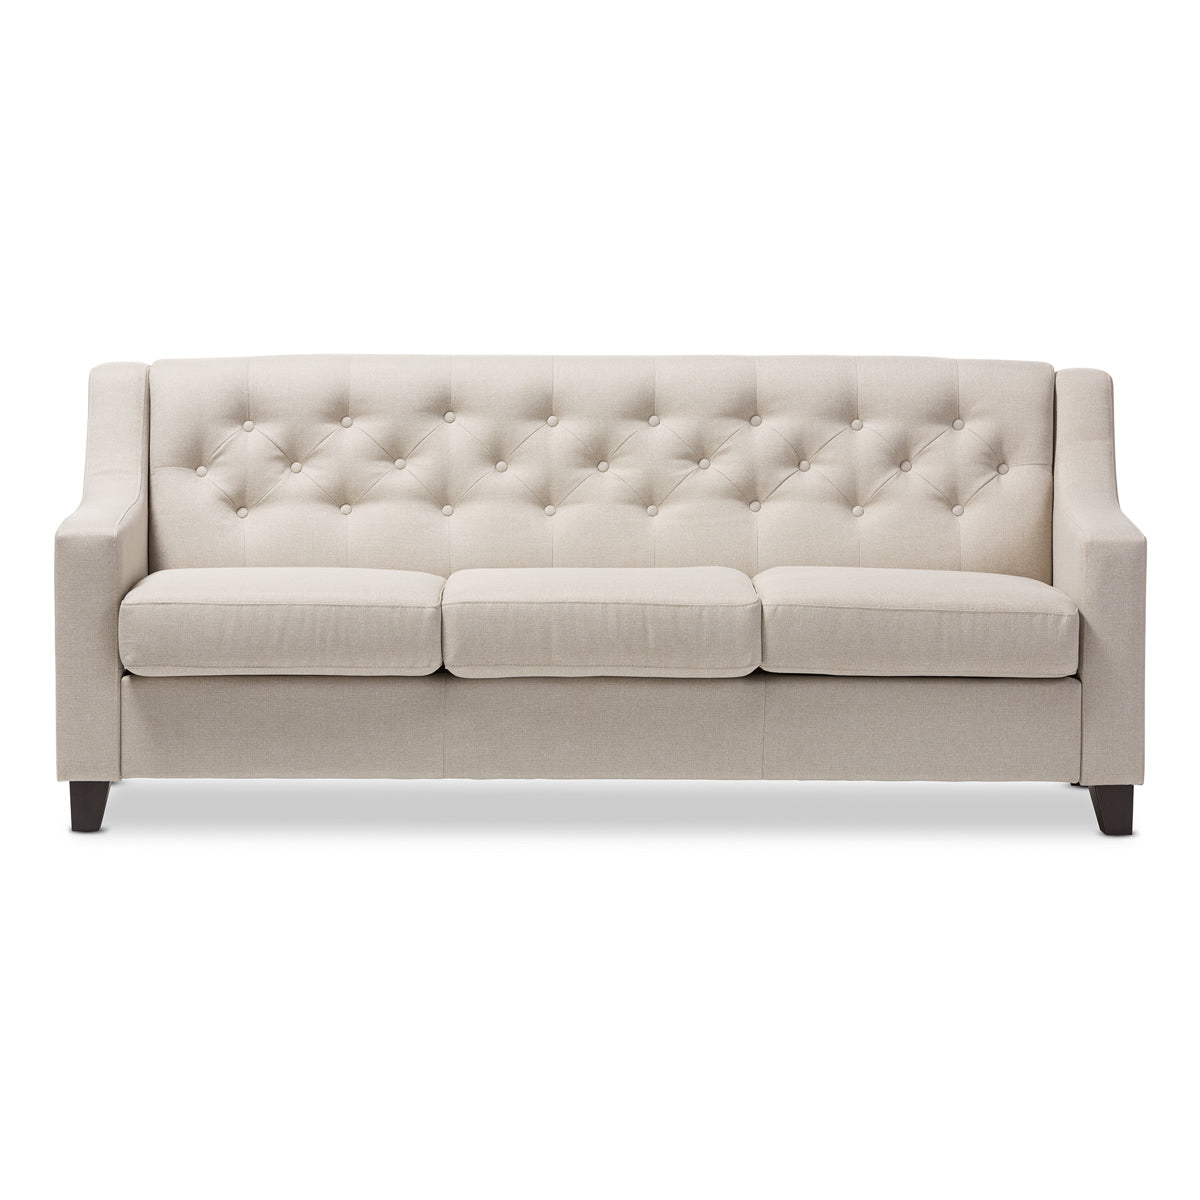 Baxton Studio Arcadia Modern and Contemporary Light Beige Fabric Upholstered Button-Tufted Living Room 3-Seater Sofa Baxton Studio-sofas-Minimal And Modern - 3